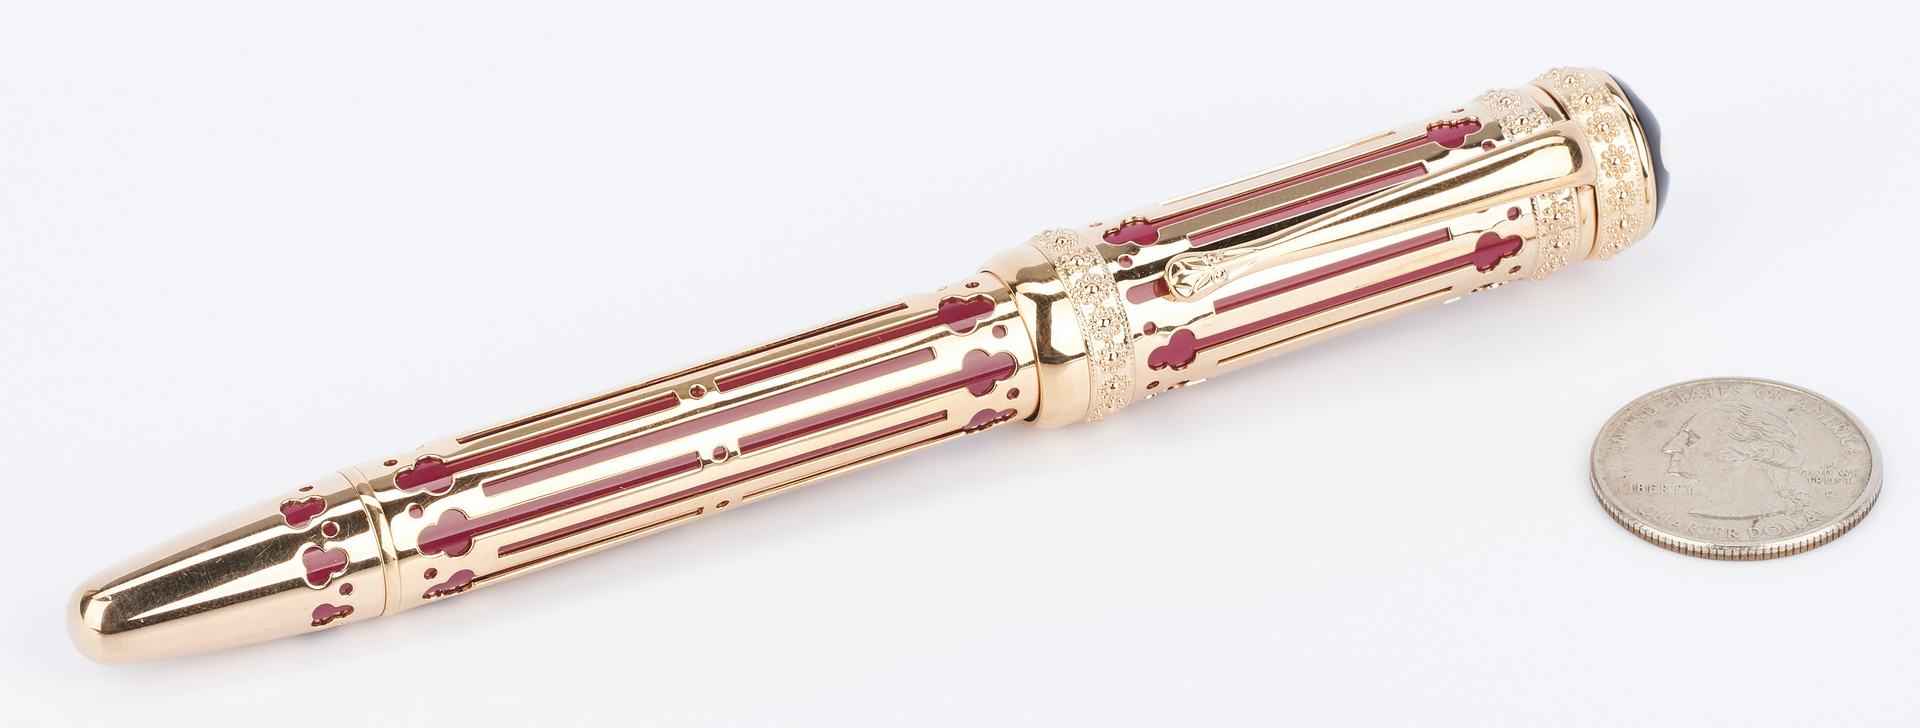 Lot 46: Montblanc Catherine the Great 4810 Fountain Pen